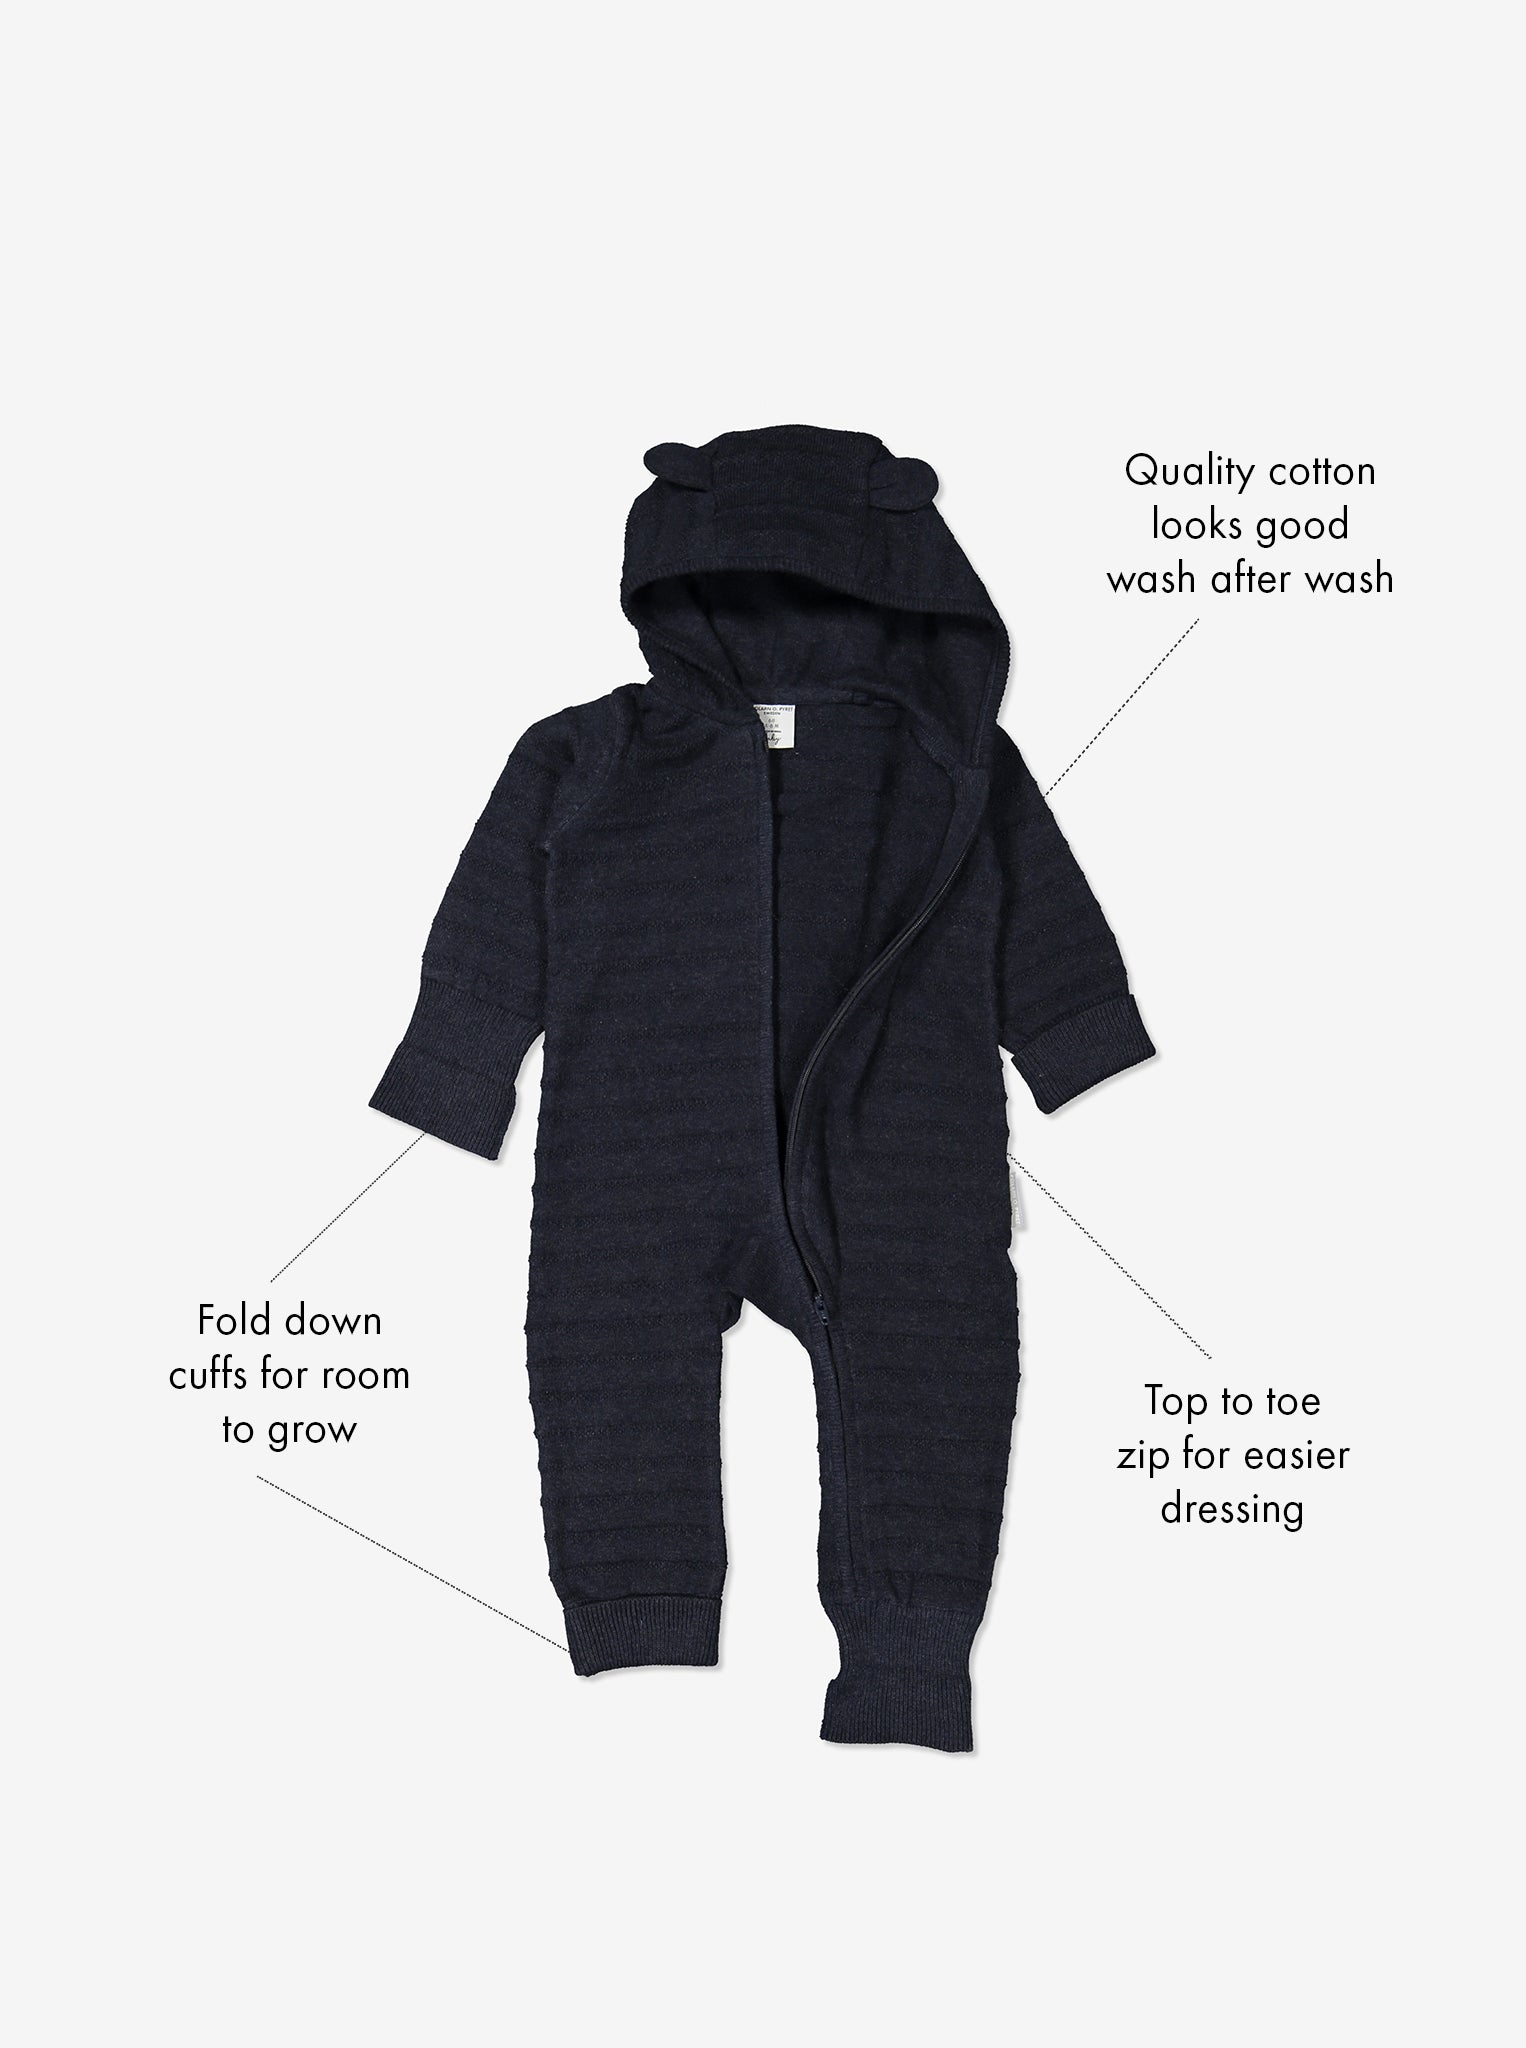 Rib Knit Baby All-in-one